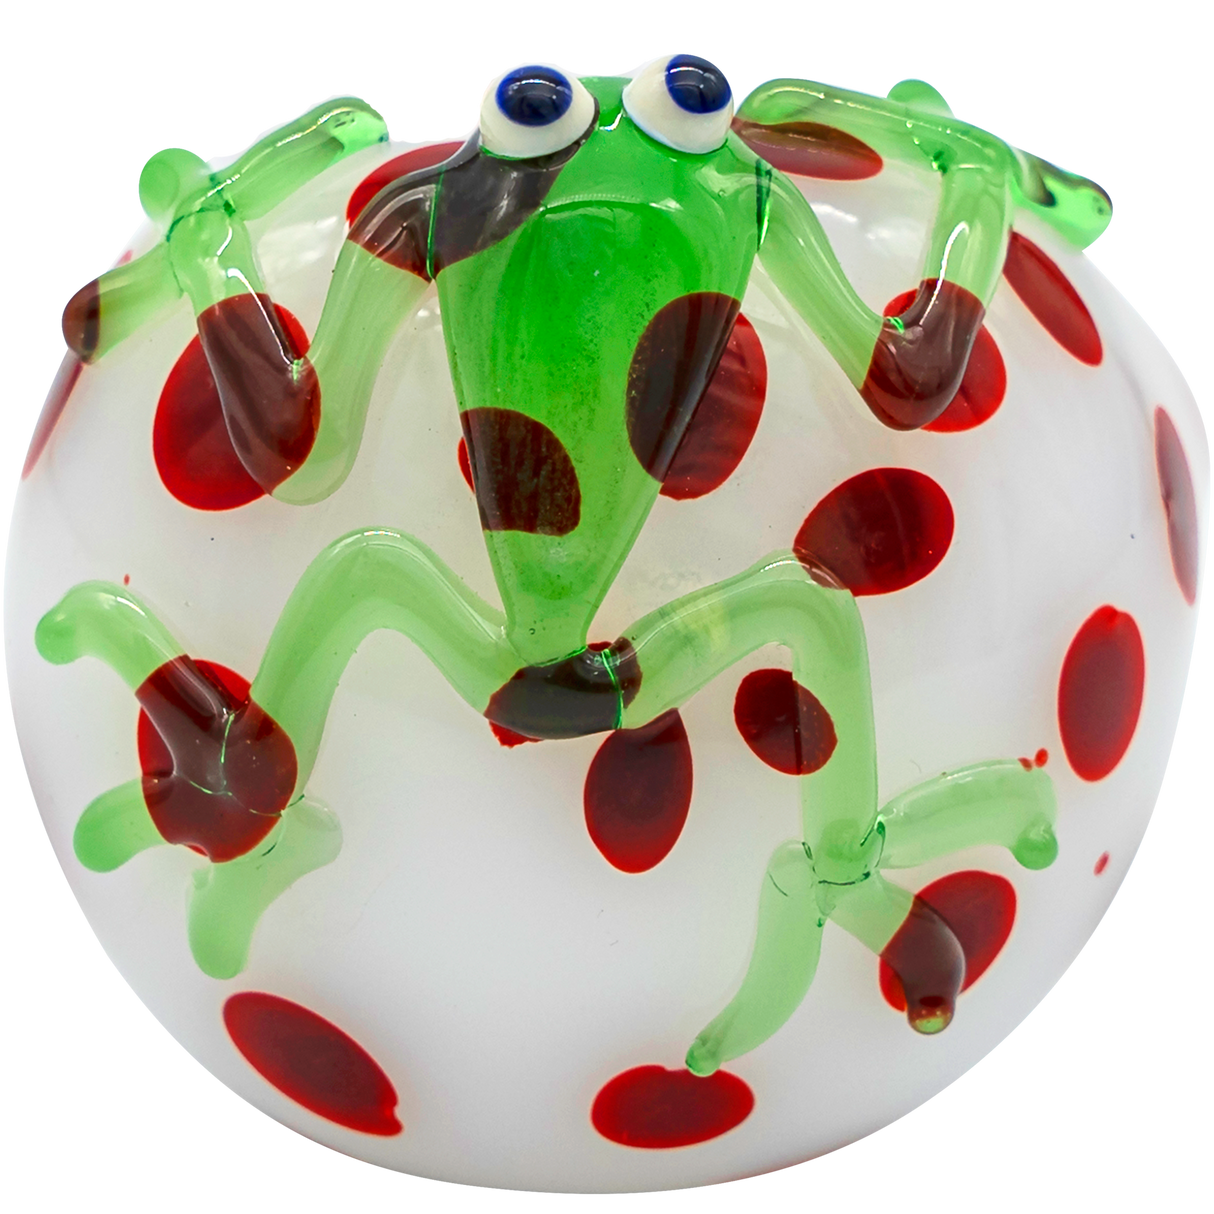 LA Pipes "Spotted Poison Frog" Spoon Glass Pipe, 4" Compact Design, Borosilicate Glass, Top View